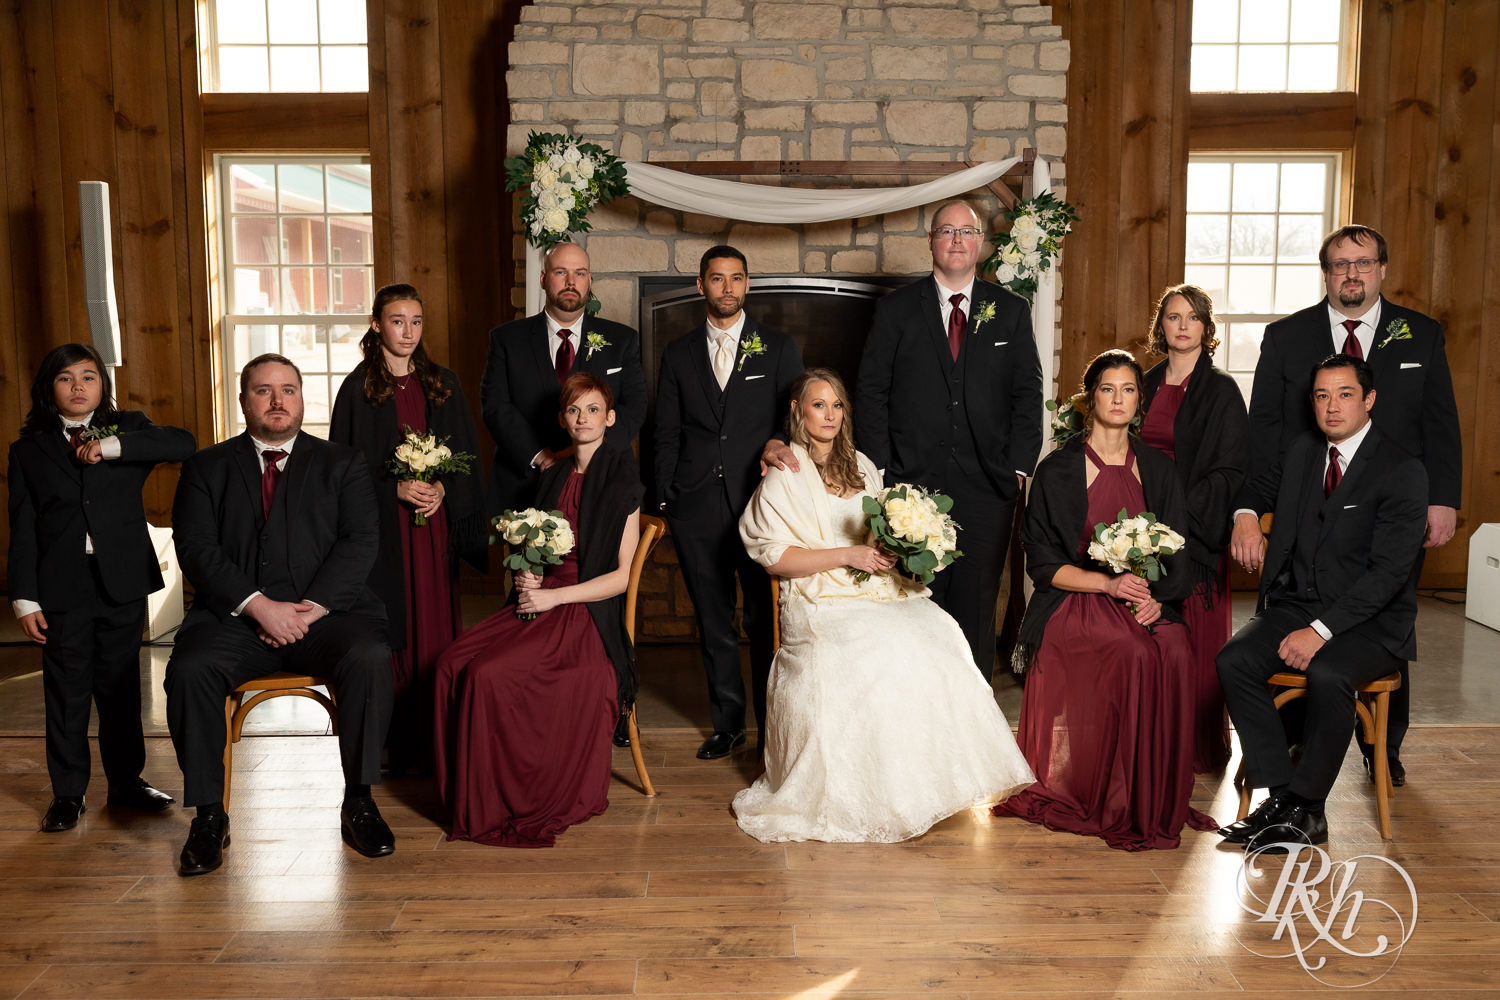 Bride and groom pose stoicly with wedding party at Almquist Farm in Hastings, Minnesota.